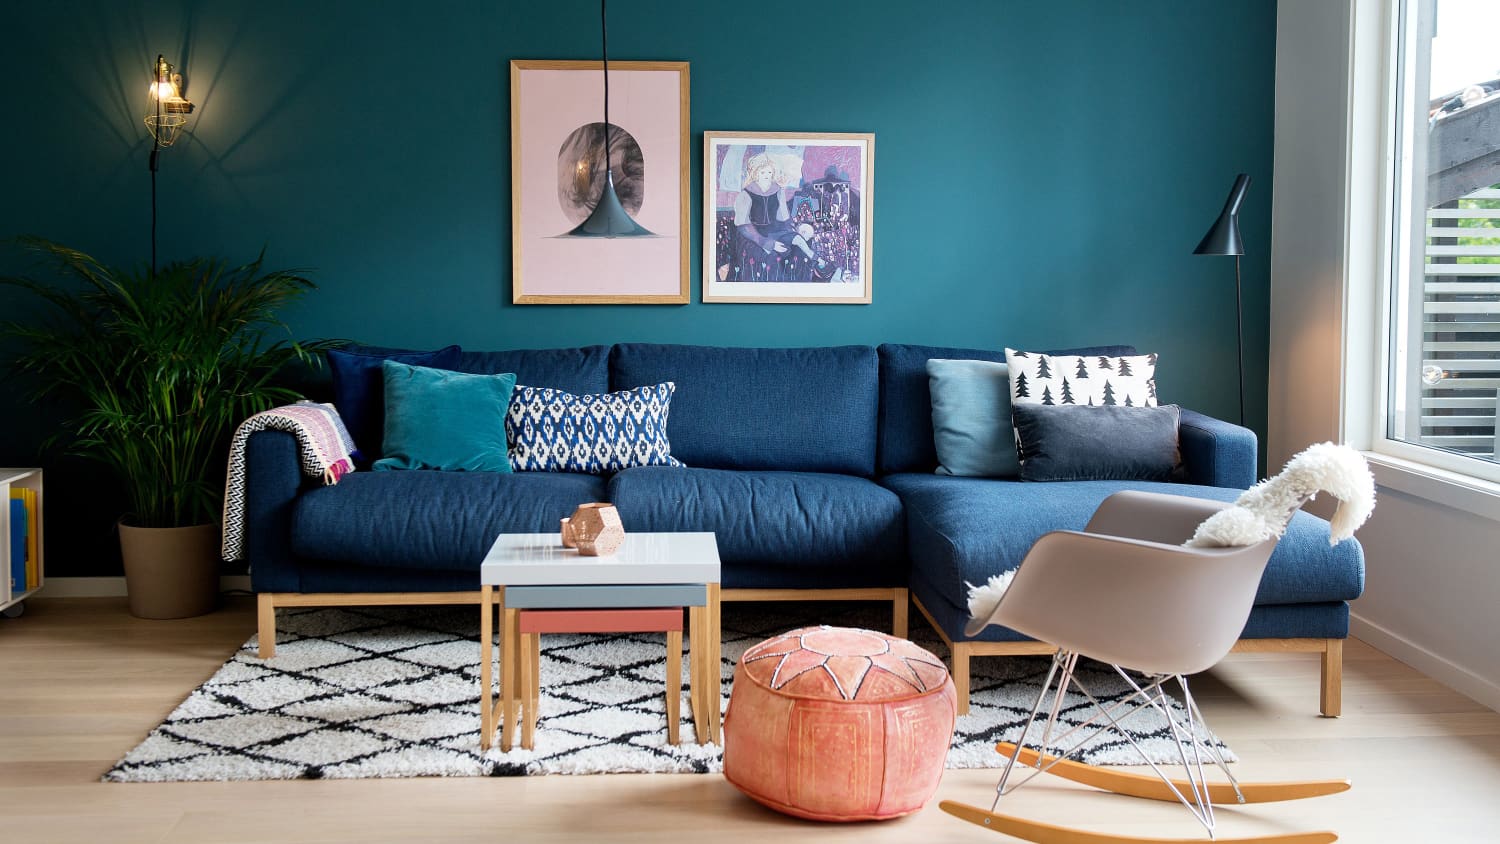 Apartment Therapy | Saving the world, one room at a time
